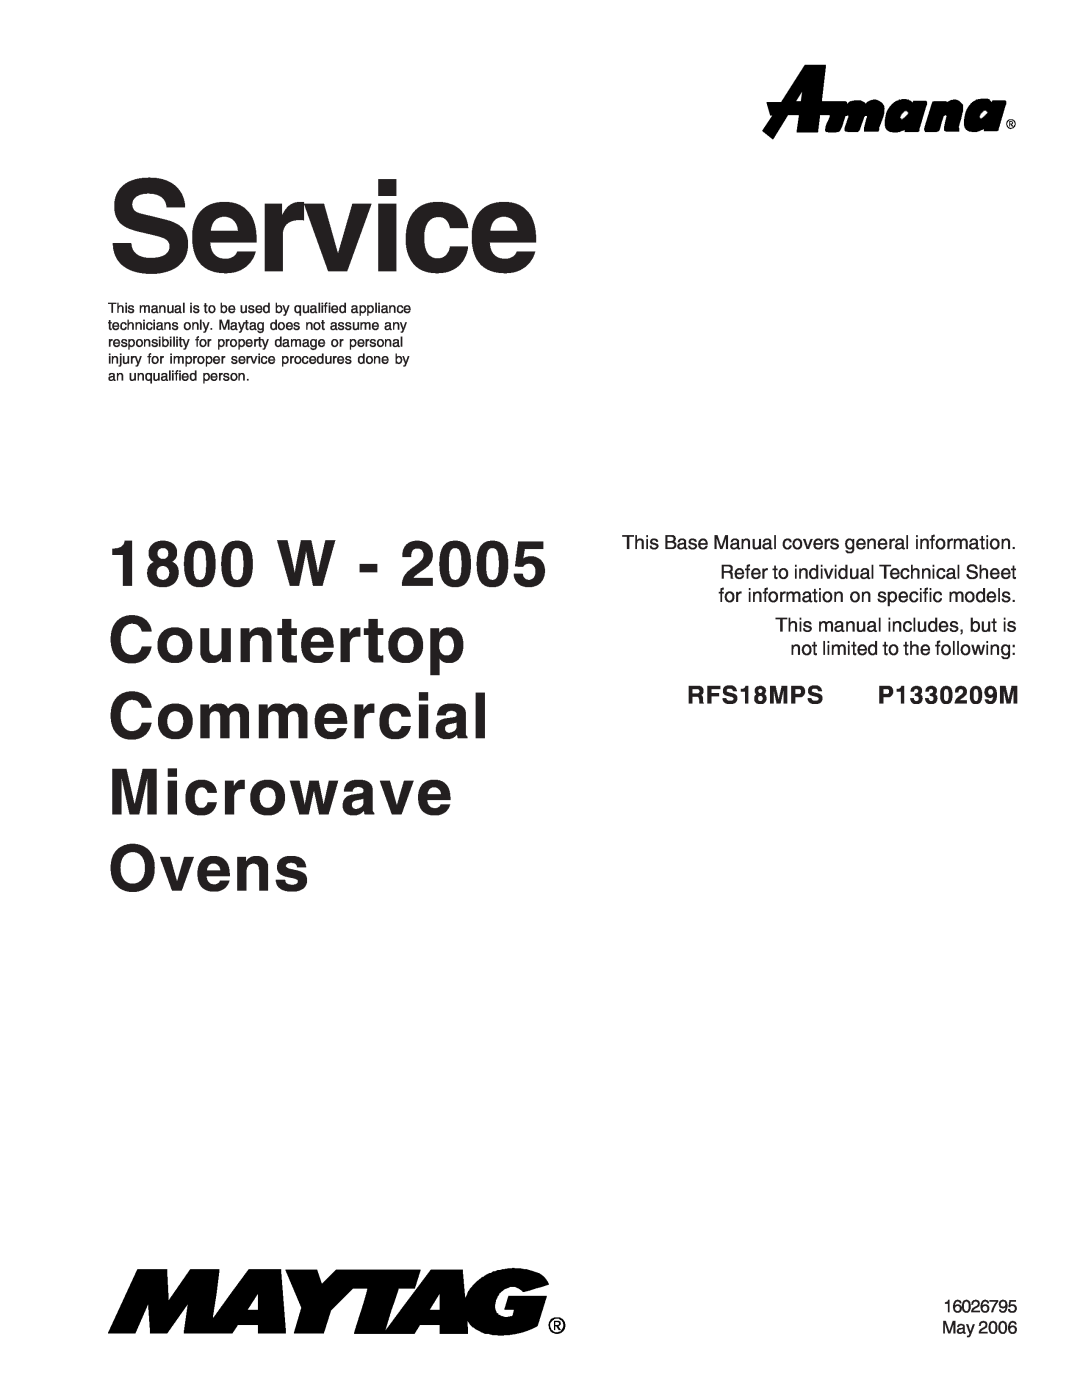 Maytag 1800 W - 2005 manual Service, RFS18MPS P1330209M, W Countertop Commercial Microwave Ovens 